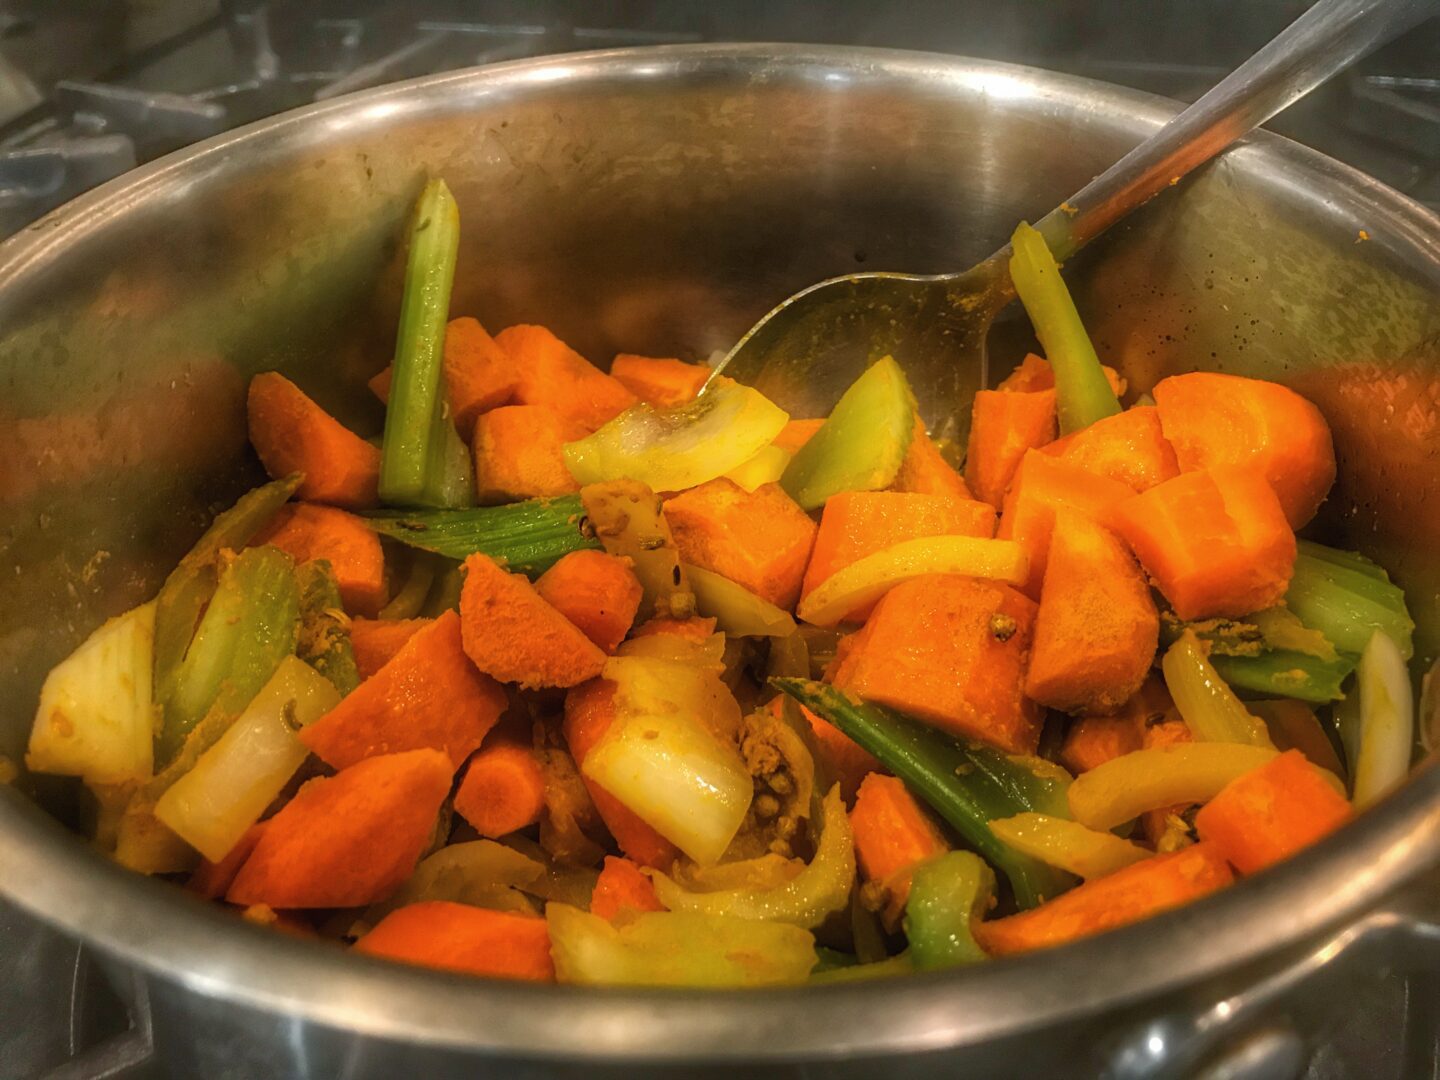 A pot of vegetables on a stove.